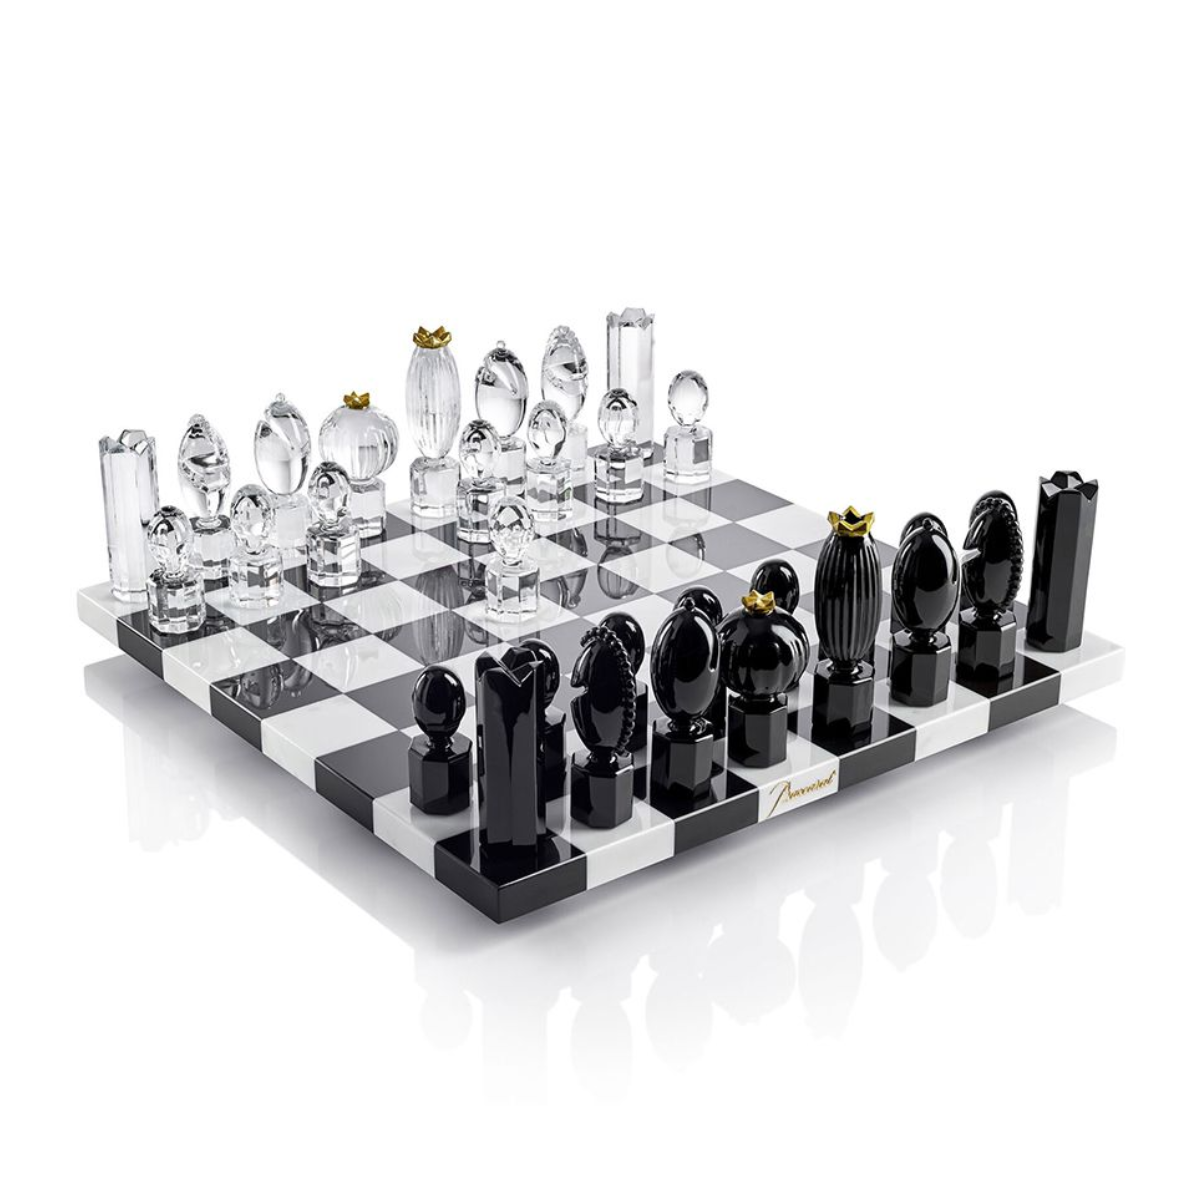 31. Shine a New Light on Your 15 Year Anniversary with a Crystal-Inlaid Chess Set